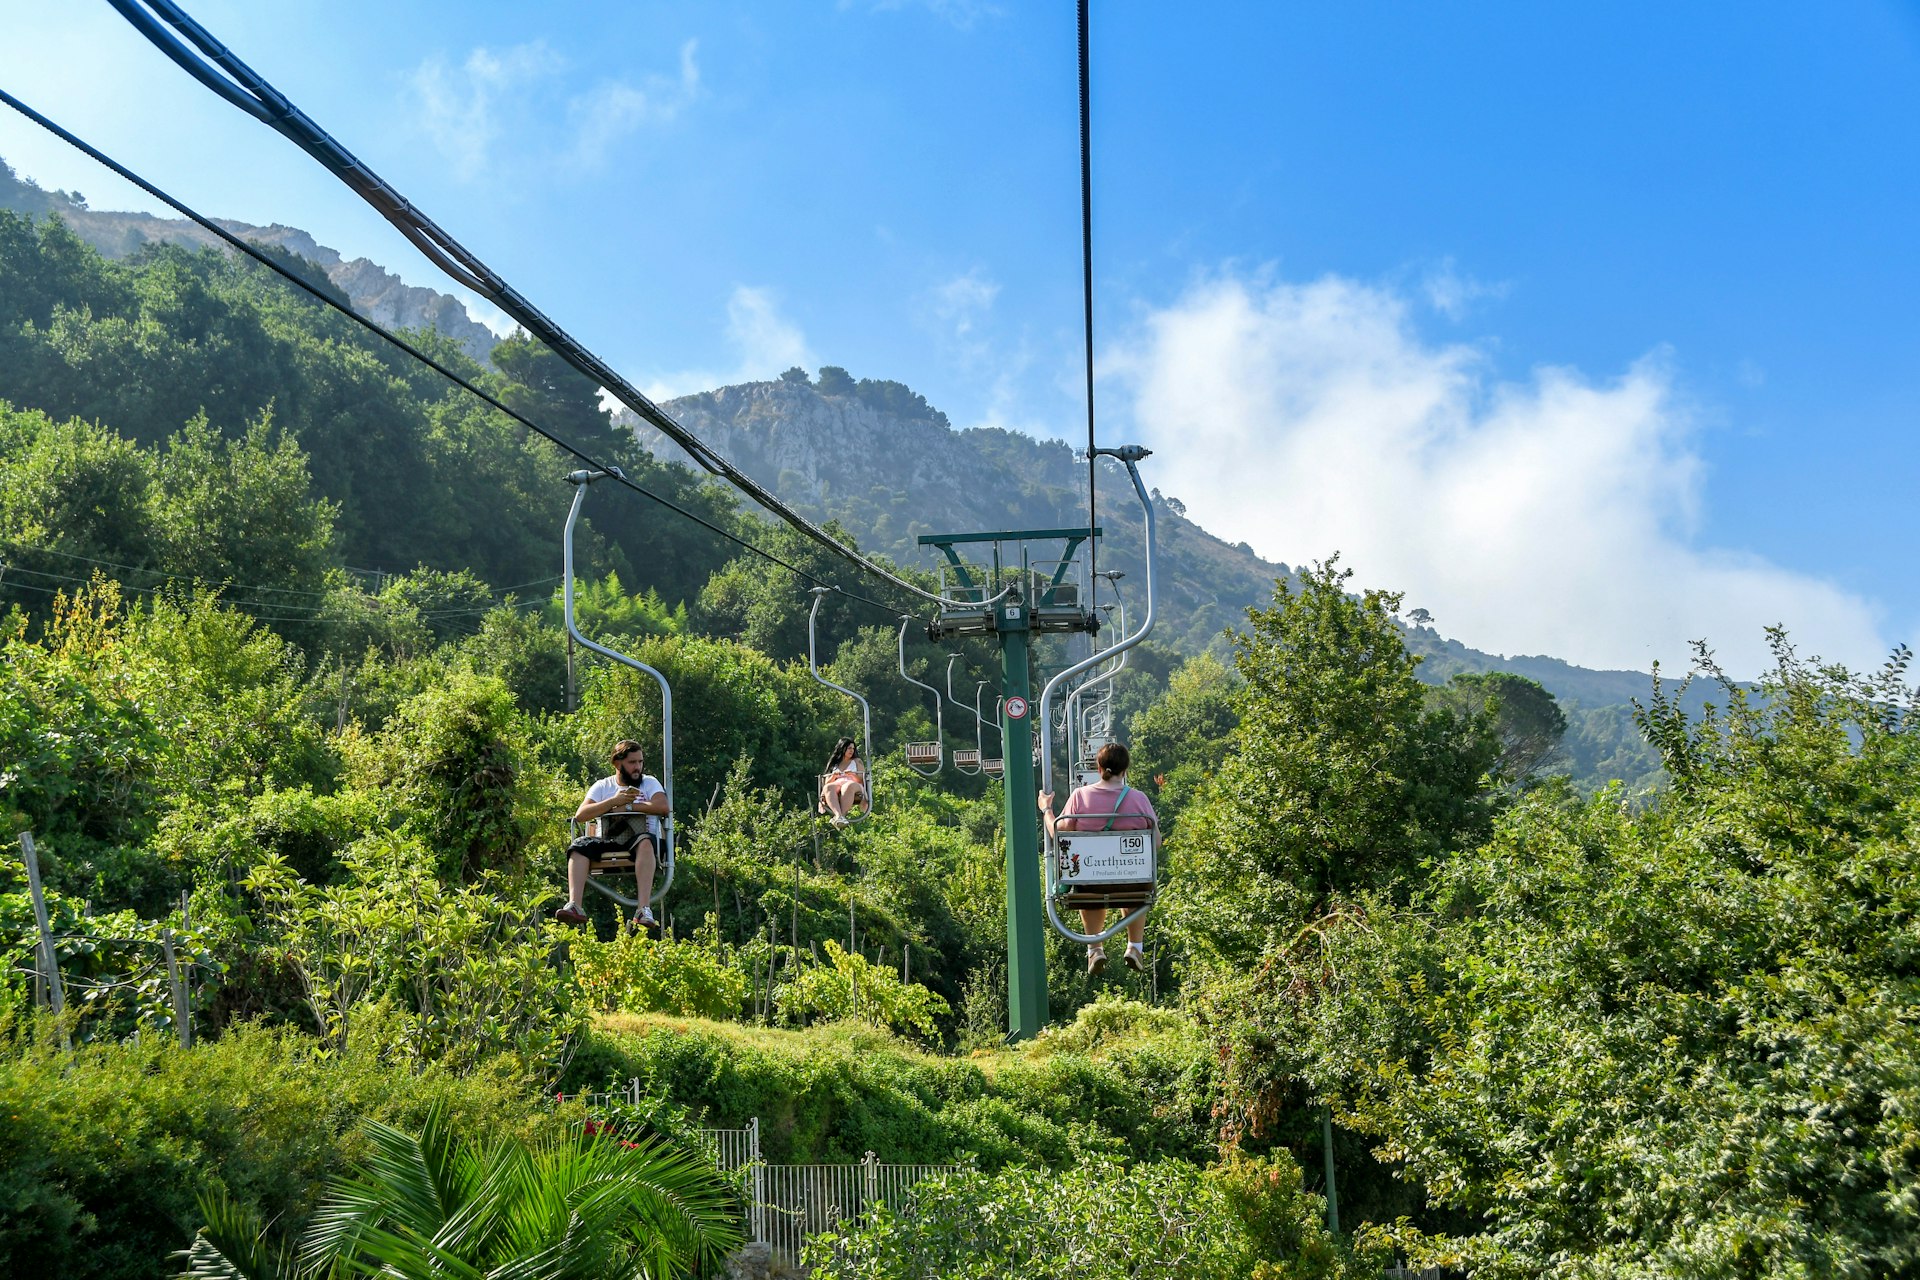 Person on a chairlift ascending Mount Solaro on Capri